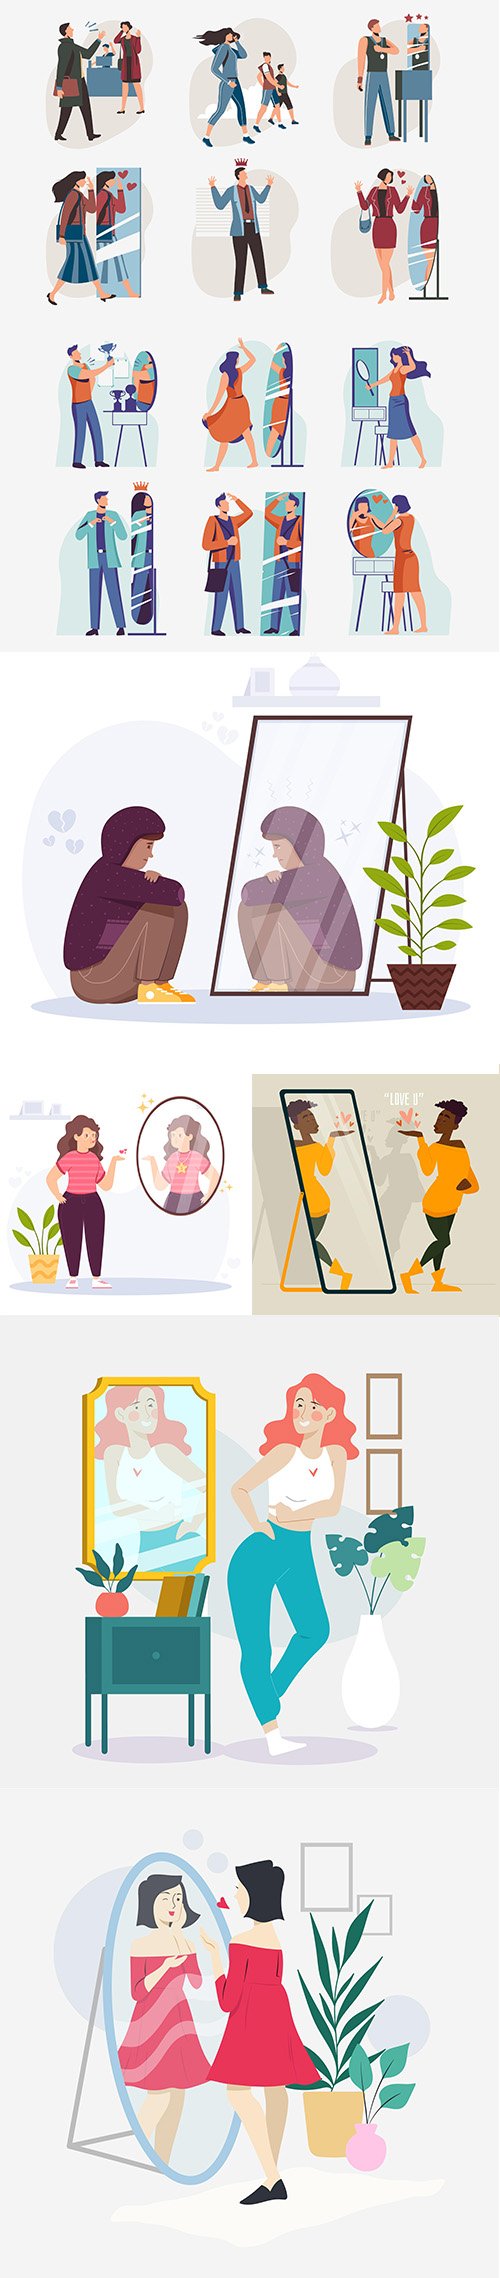 High self-esteem illustration collection with people